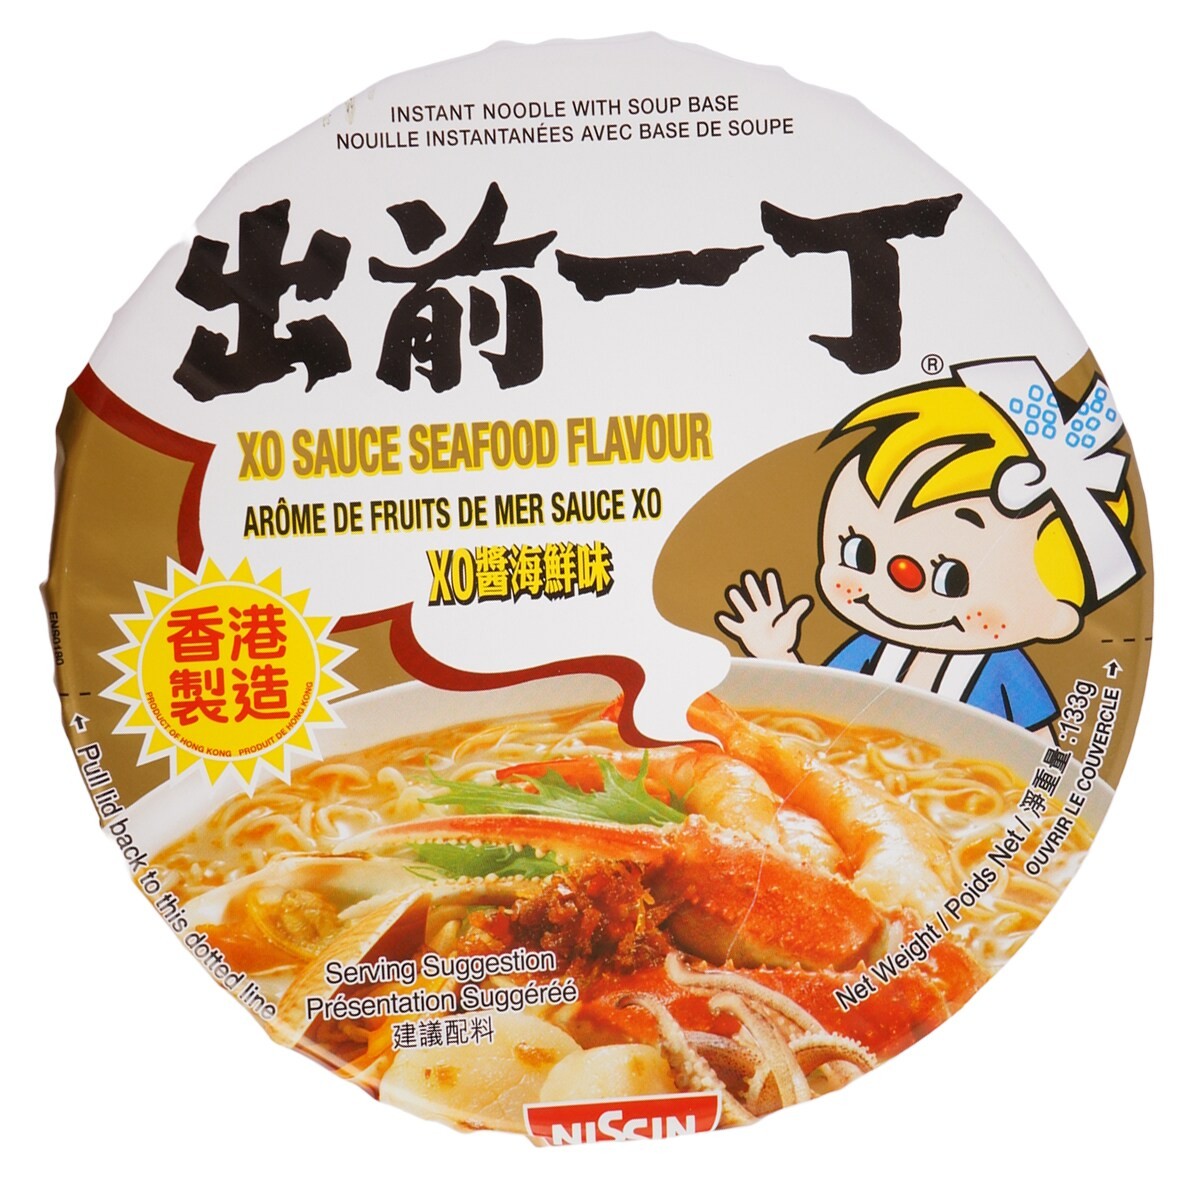 instant-noodles-with-soup-base-xo-sauce-seafood-flavor